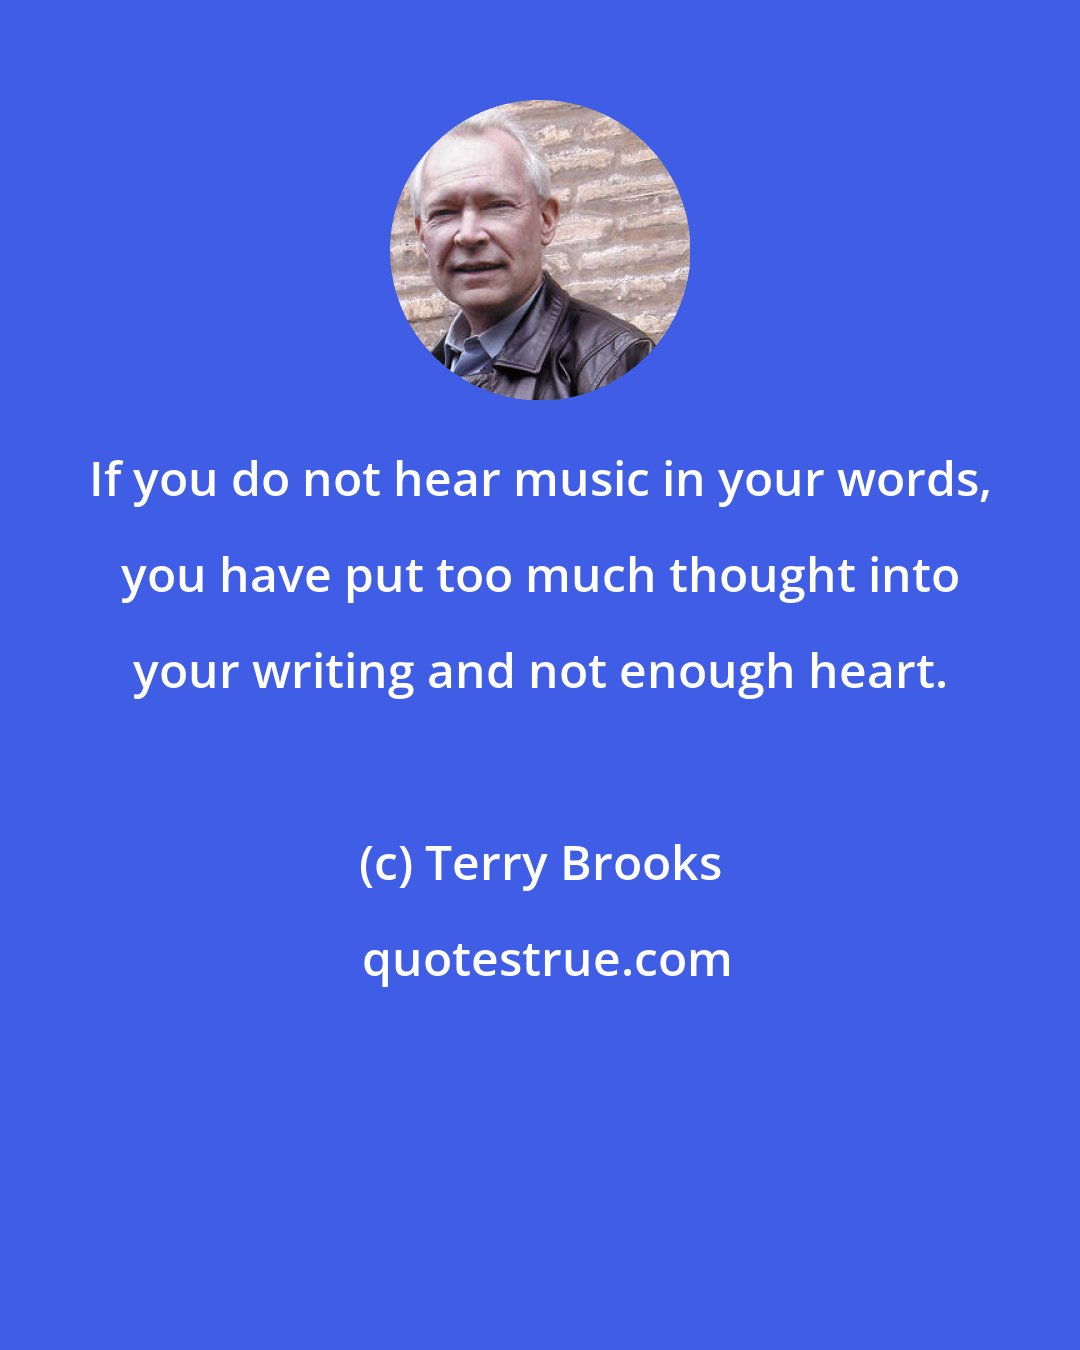 Terry Brooks: If you do not hear music in your words, you have put too much thought into your writing and not enough heart.